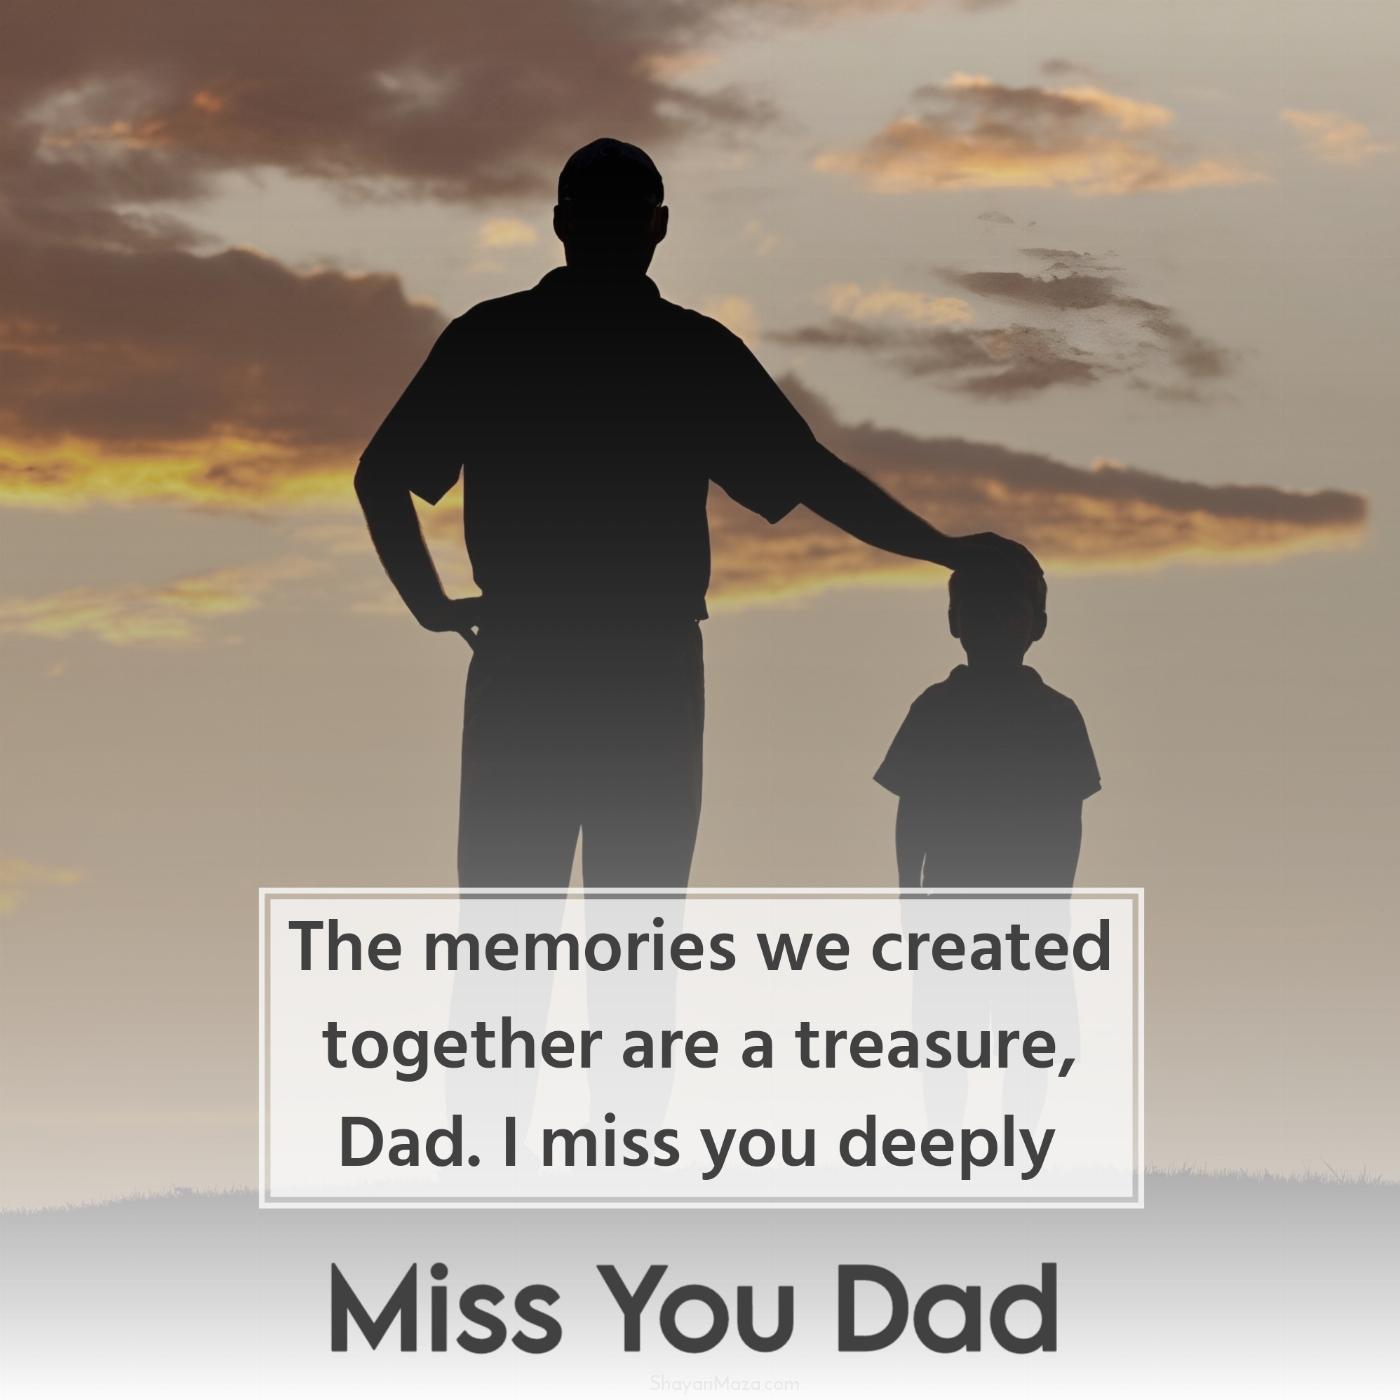 The memories we created together are a treasure Dad